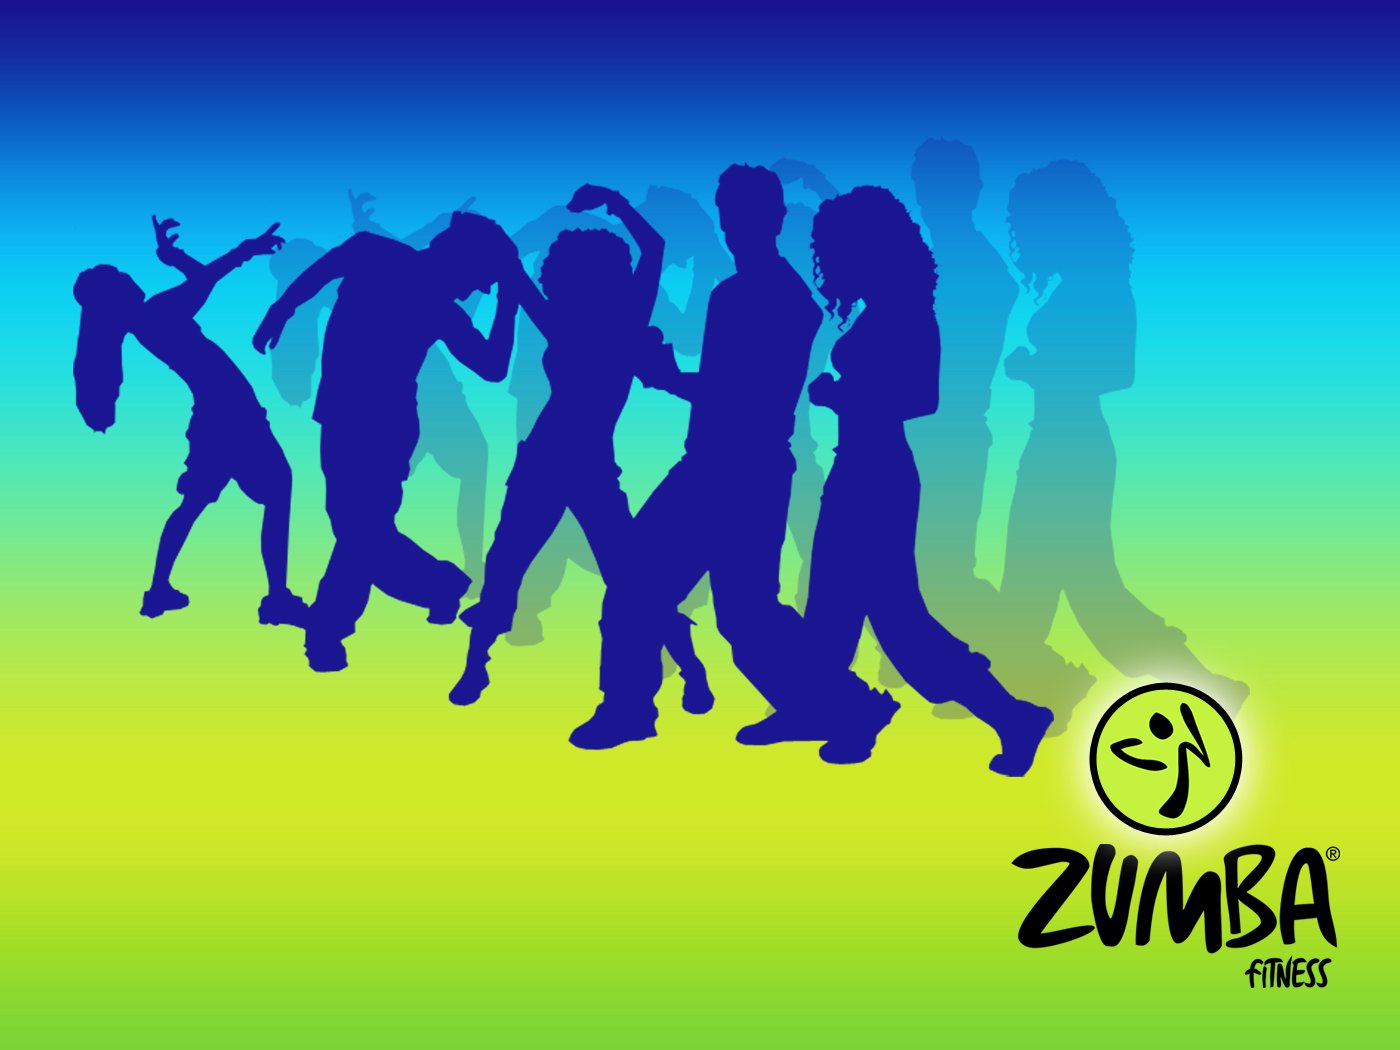 Try Zumba Well I Have Zumba Videos So Today We Used The Zumba Videos